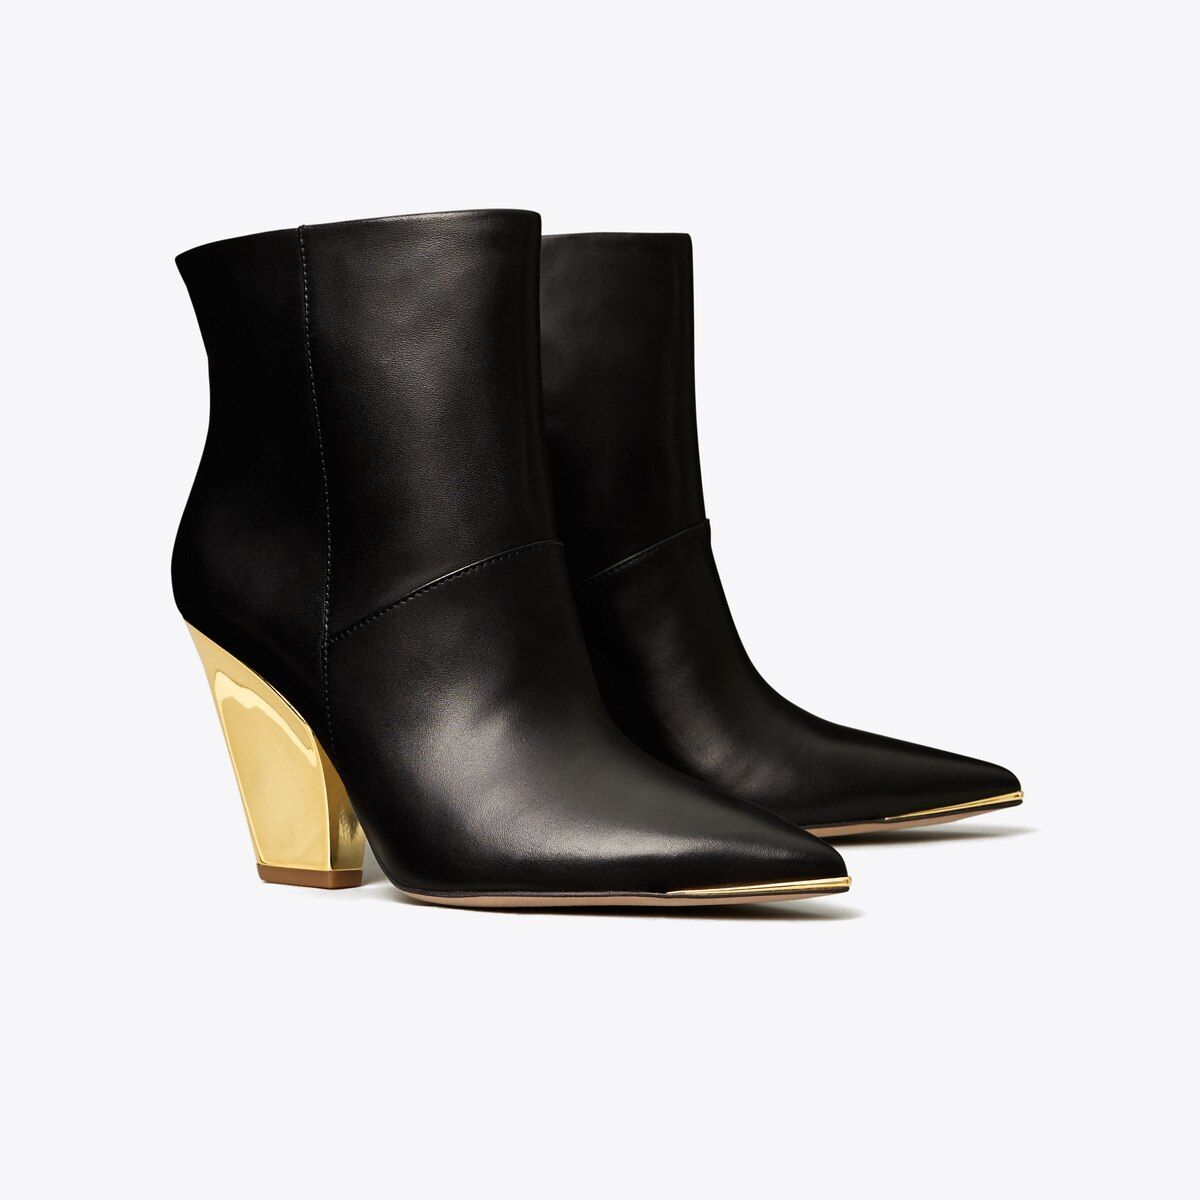 Lila Ankle Bootie: Women's Designer Ankle Boots | Tory Burch | Tory Burch (US)